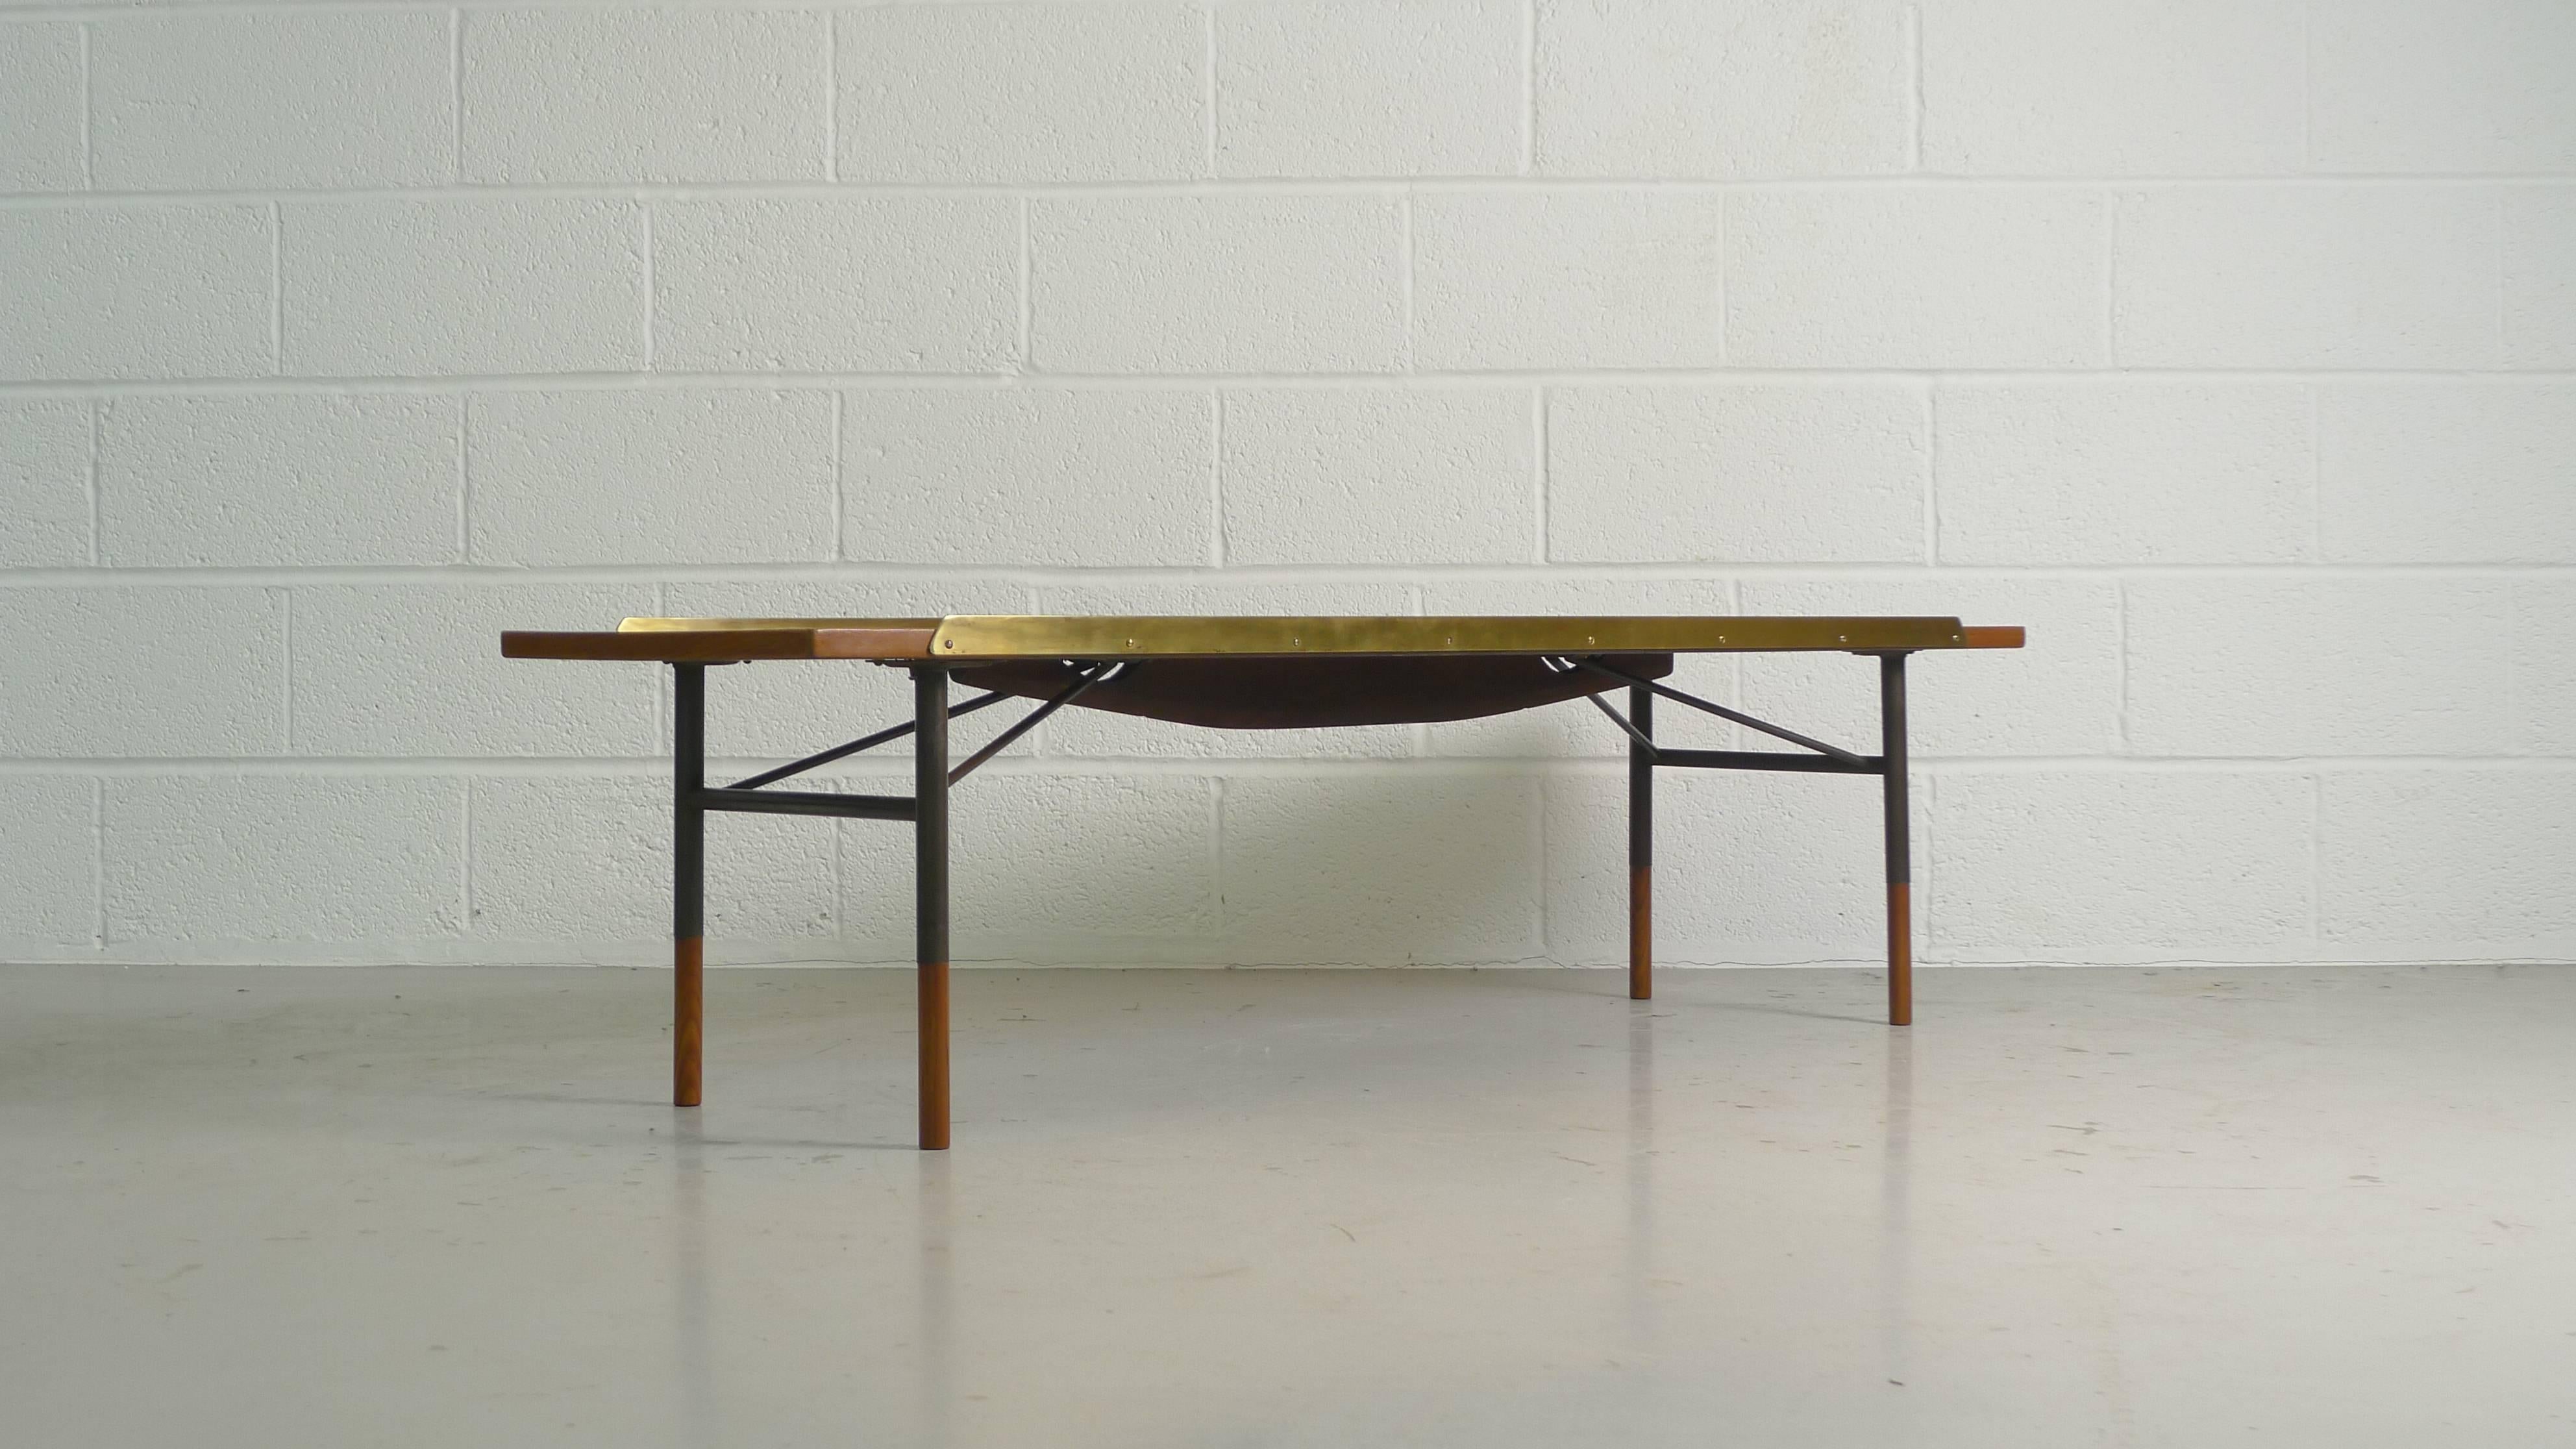 Finn Juhl for Bovirke, Denmark, 1952 . A bench or coffee table with stunning teak top , wood and steel subframe supported by teak leg cappings. Top has brass siderails to contain cushions or prevent items sliding off. 

A rare Juhl table in